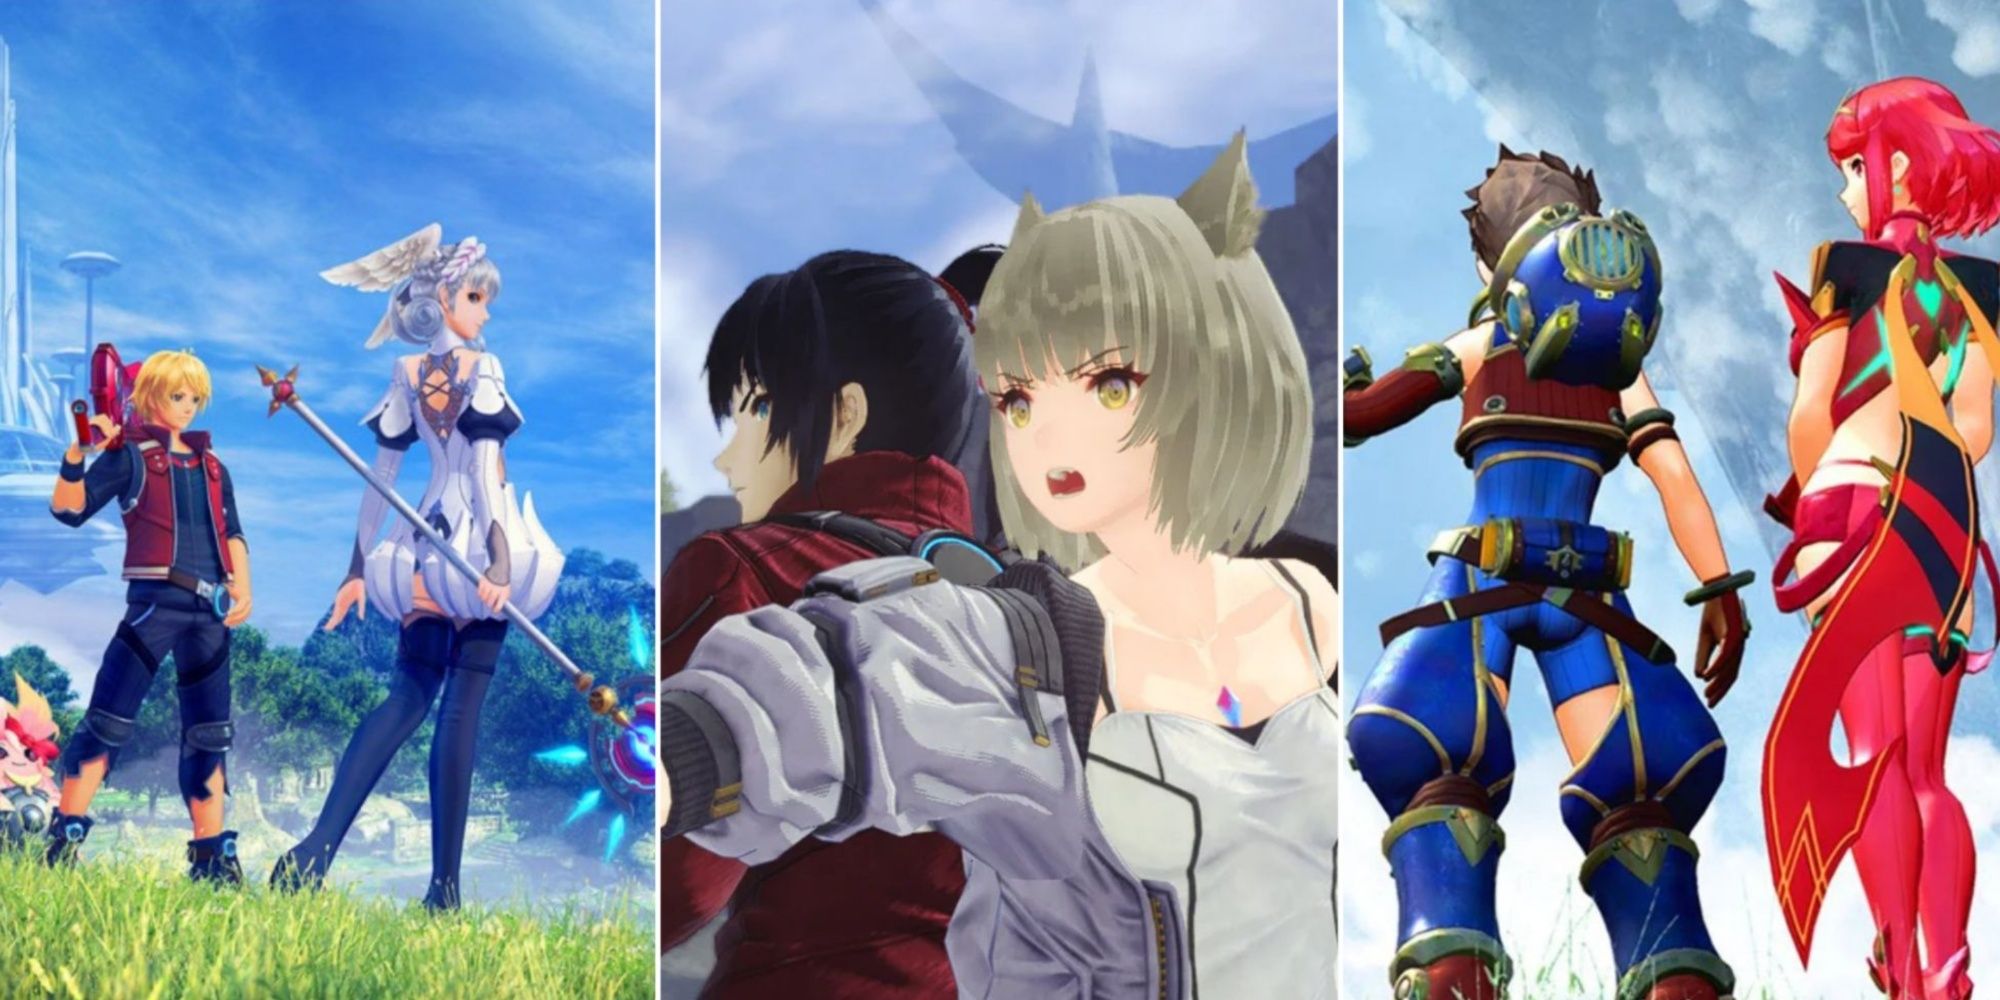 Split image of Shulk and Melia, Noah and Mio, and Rex and Pyra.